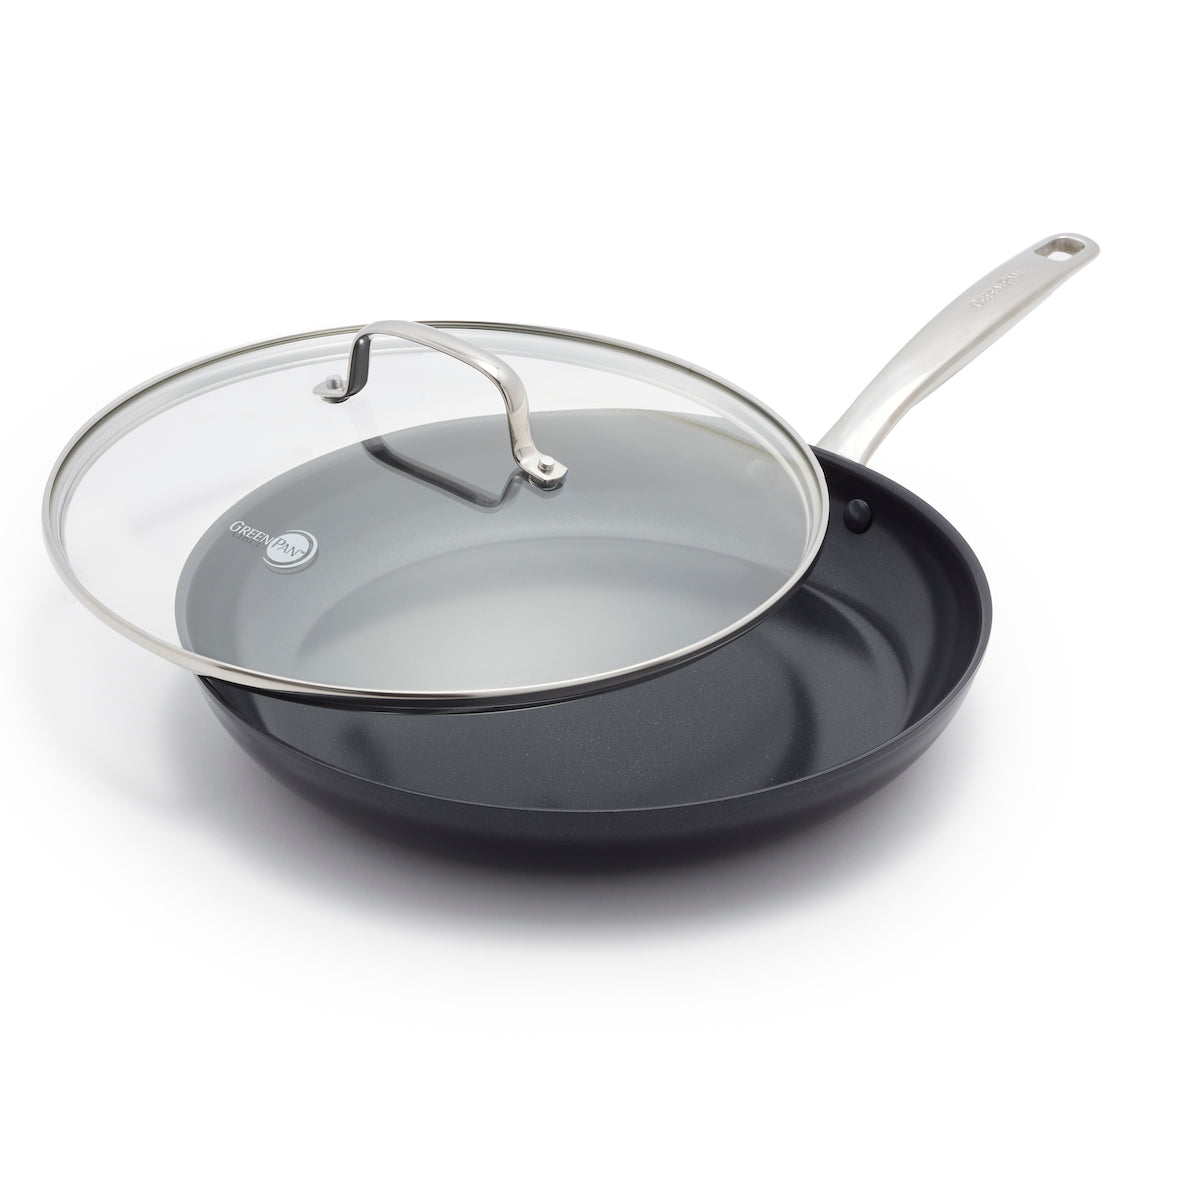 Chatham Black Ceramic Nonstick 12 Frypan with Lid